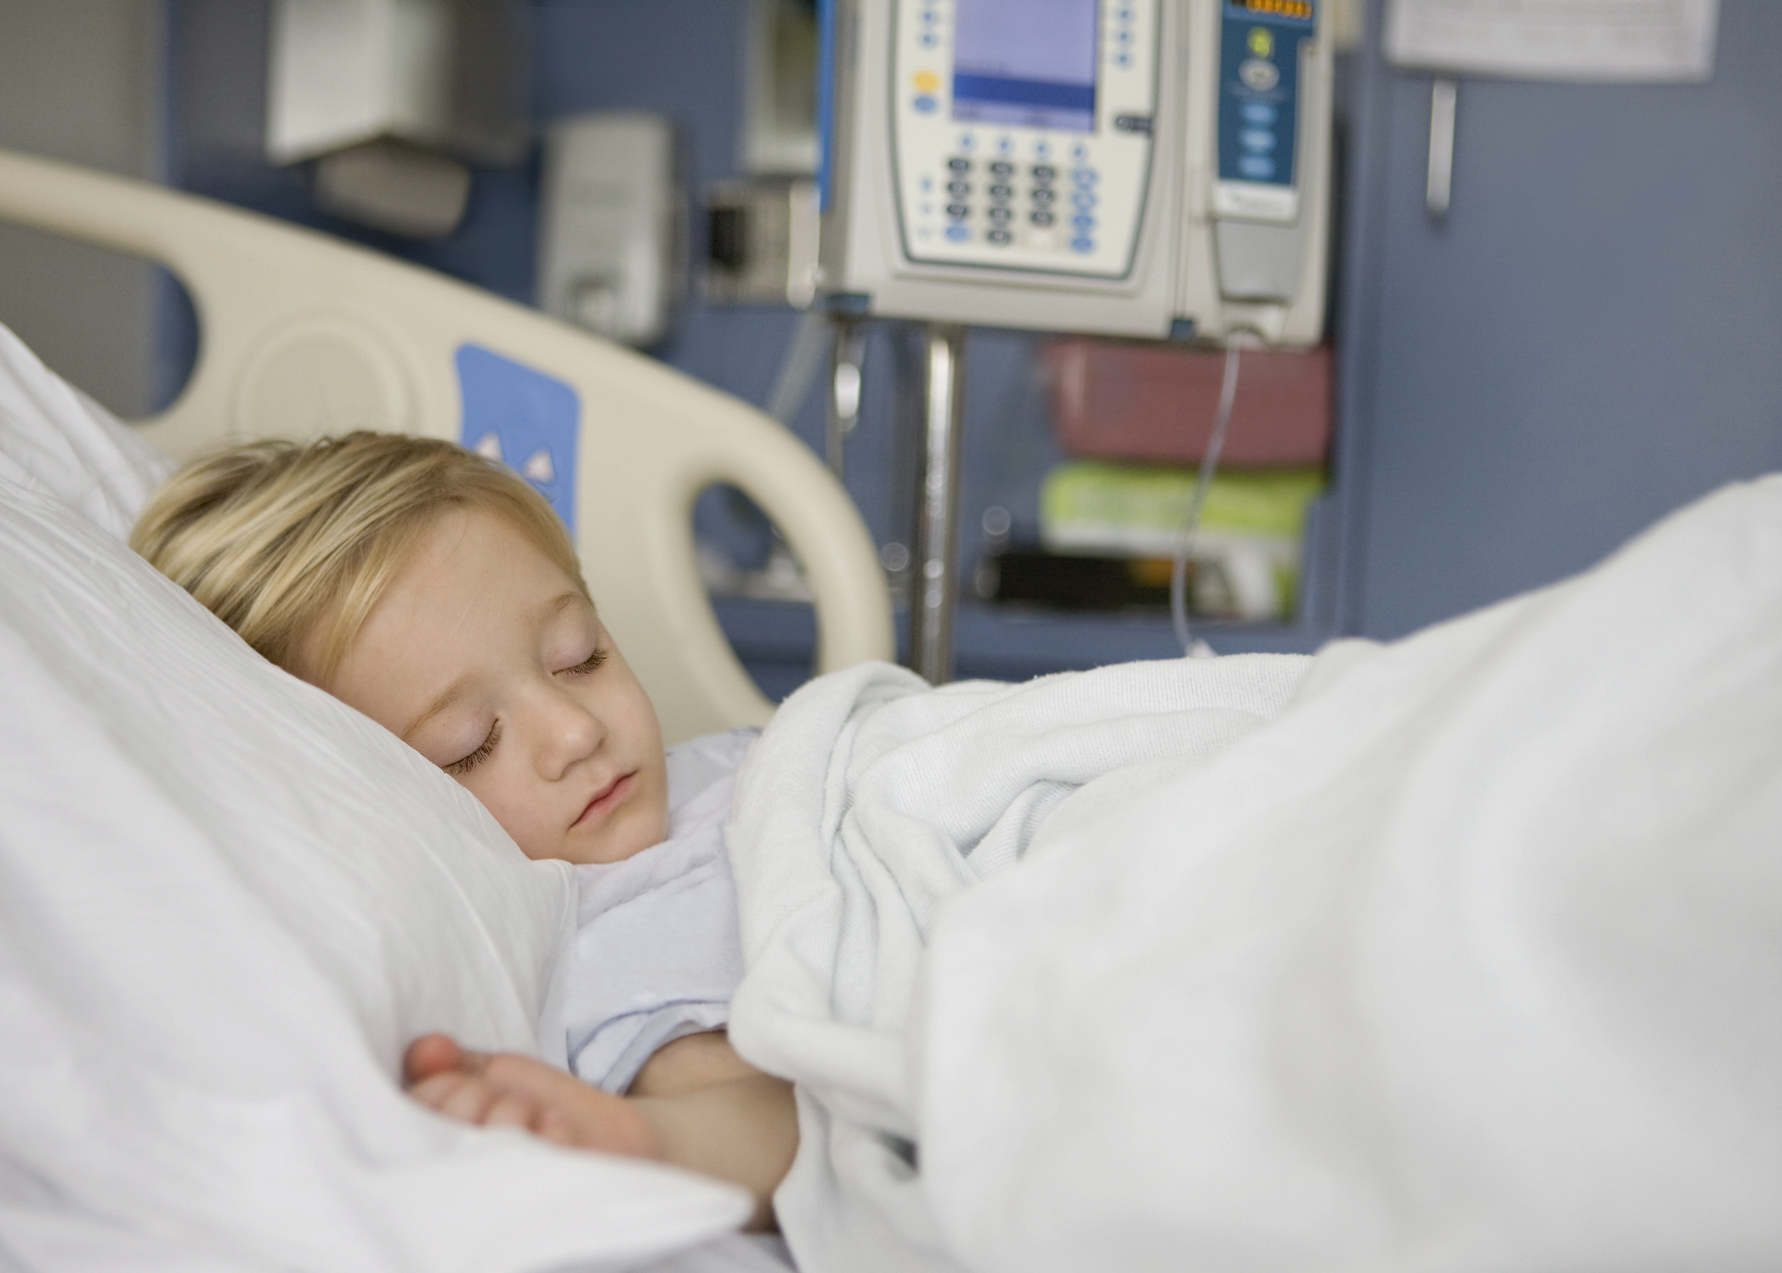 Young girl sleeping in hospital bed